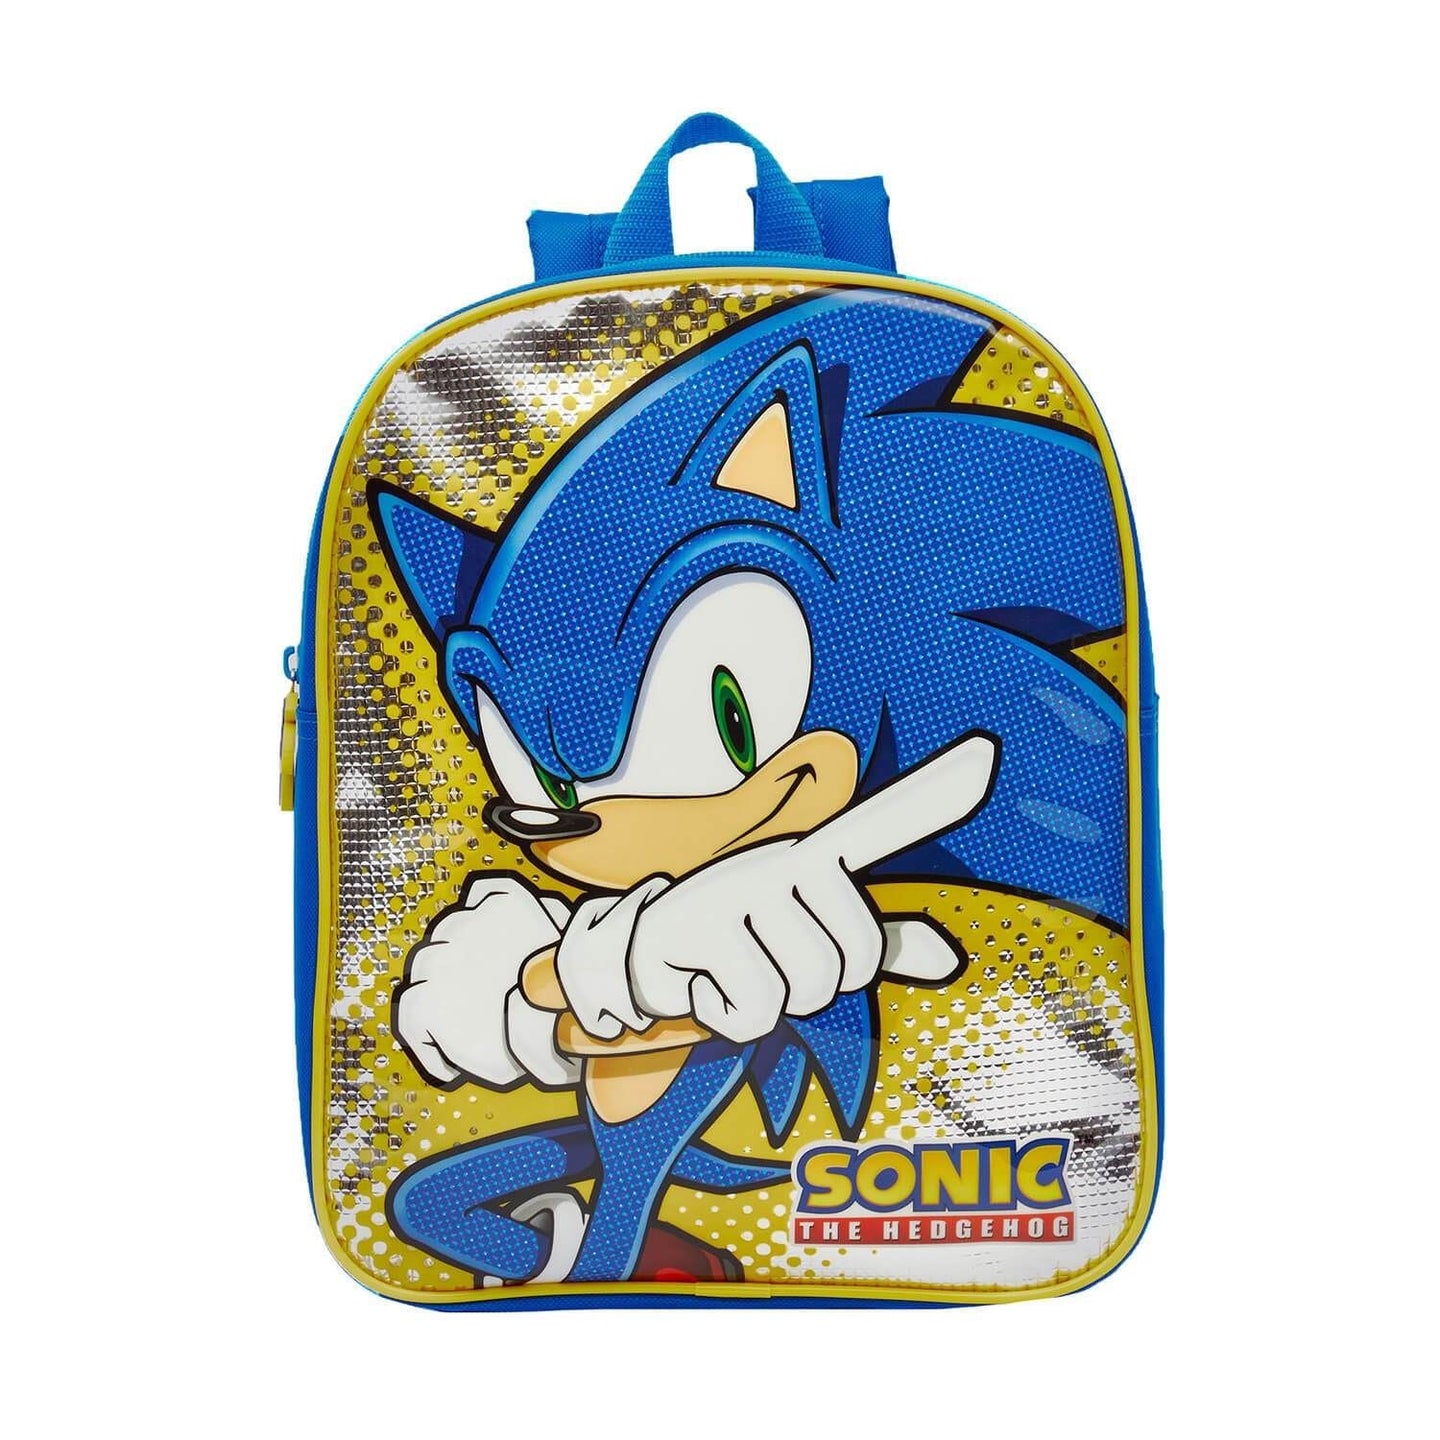 Children's Sonic the Hedgehog Character Backpack.